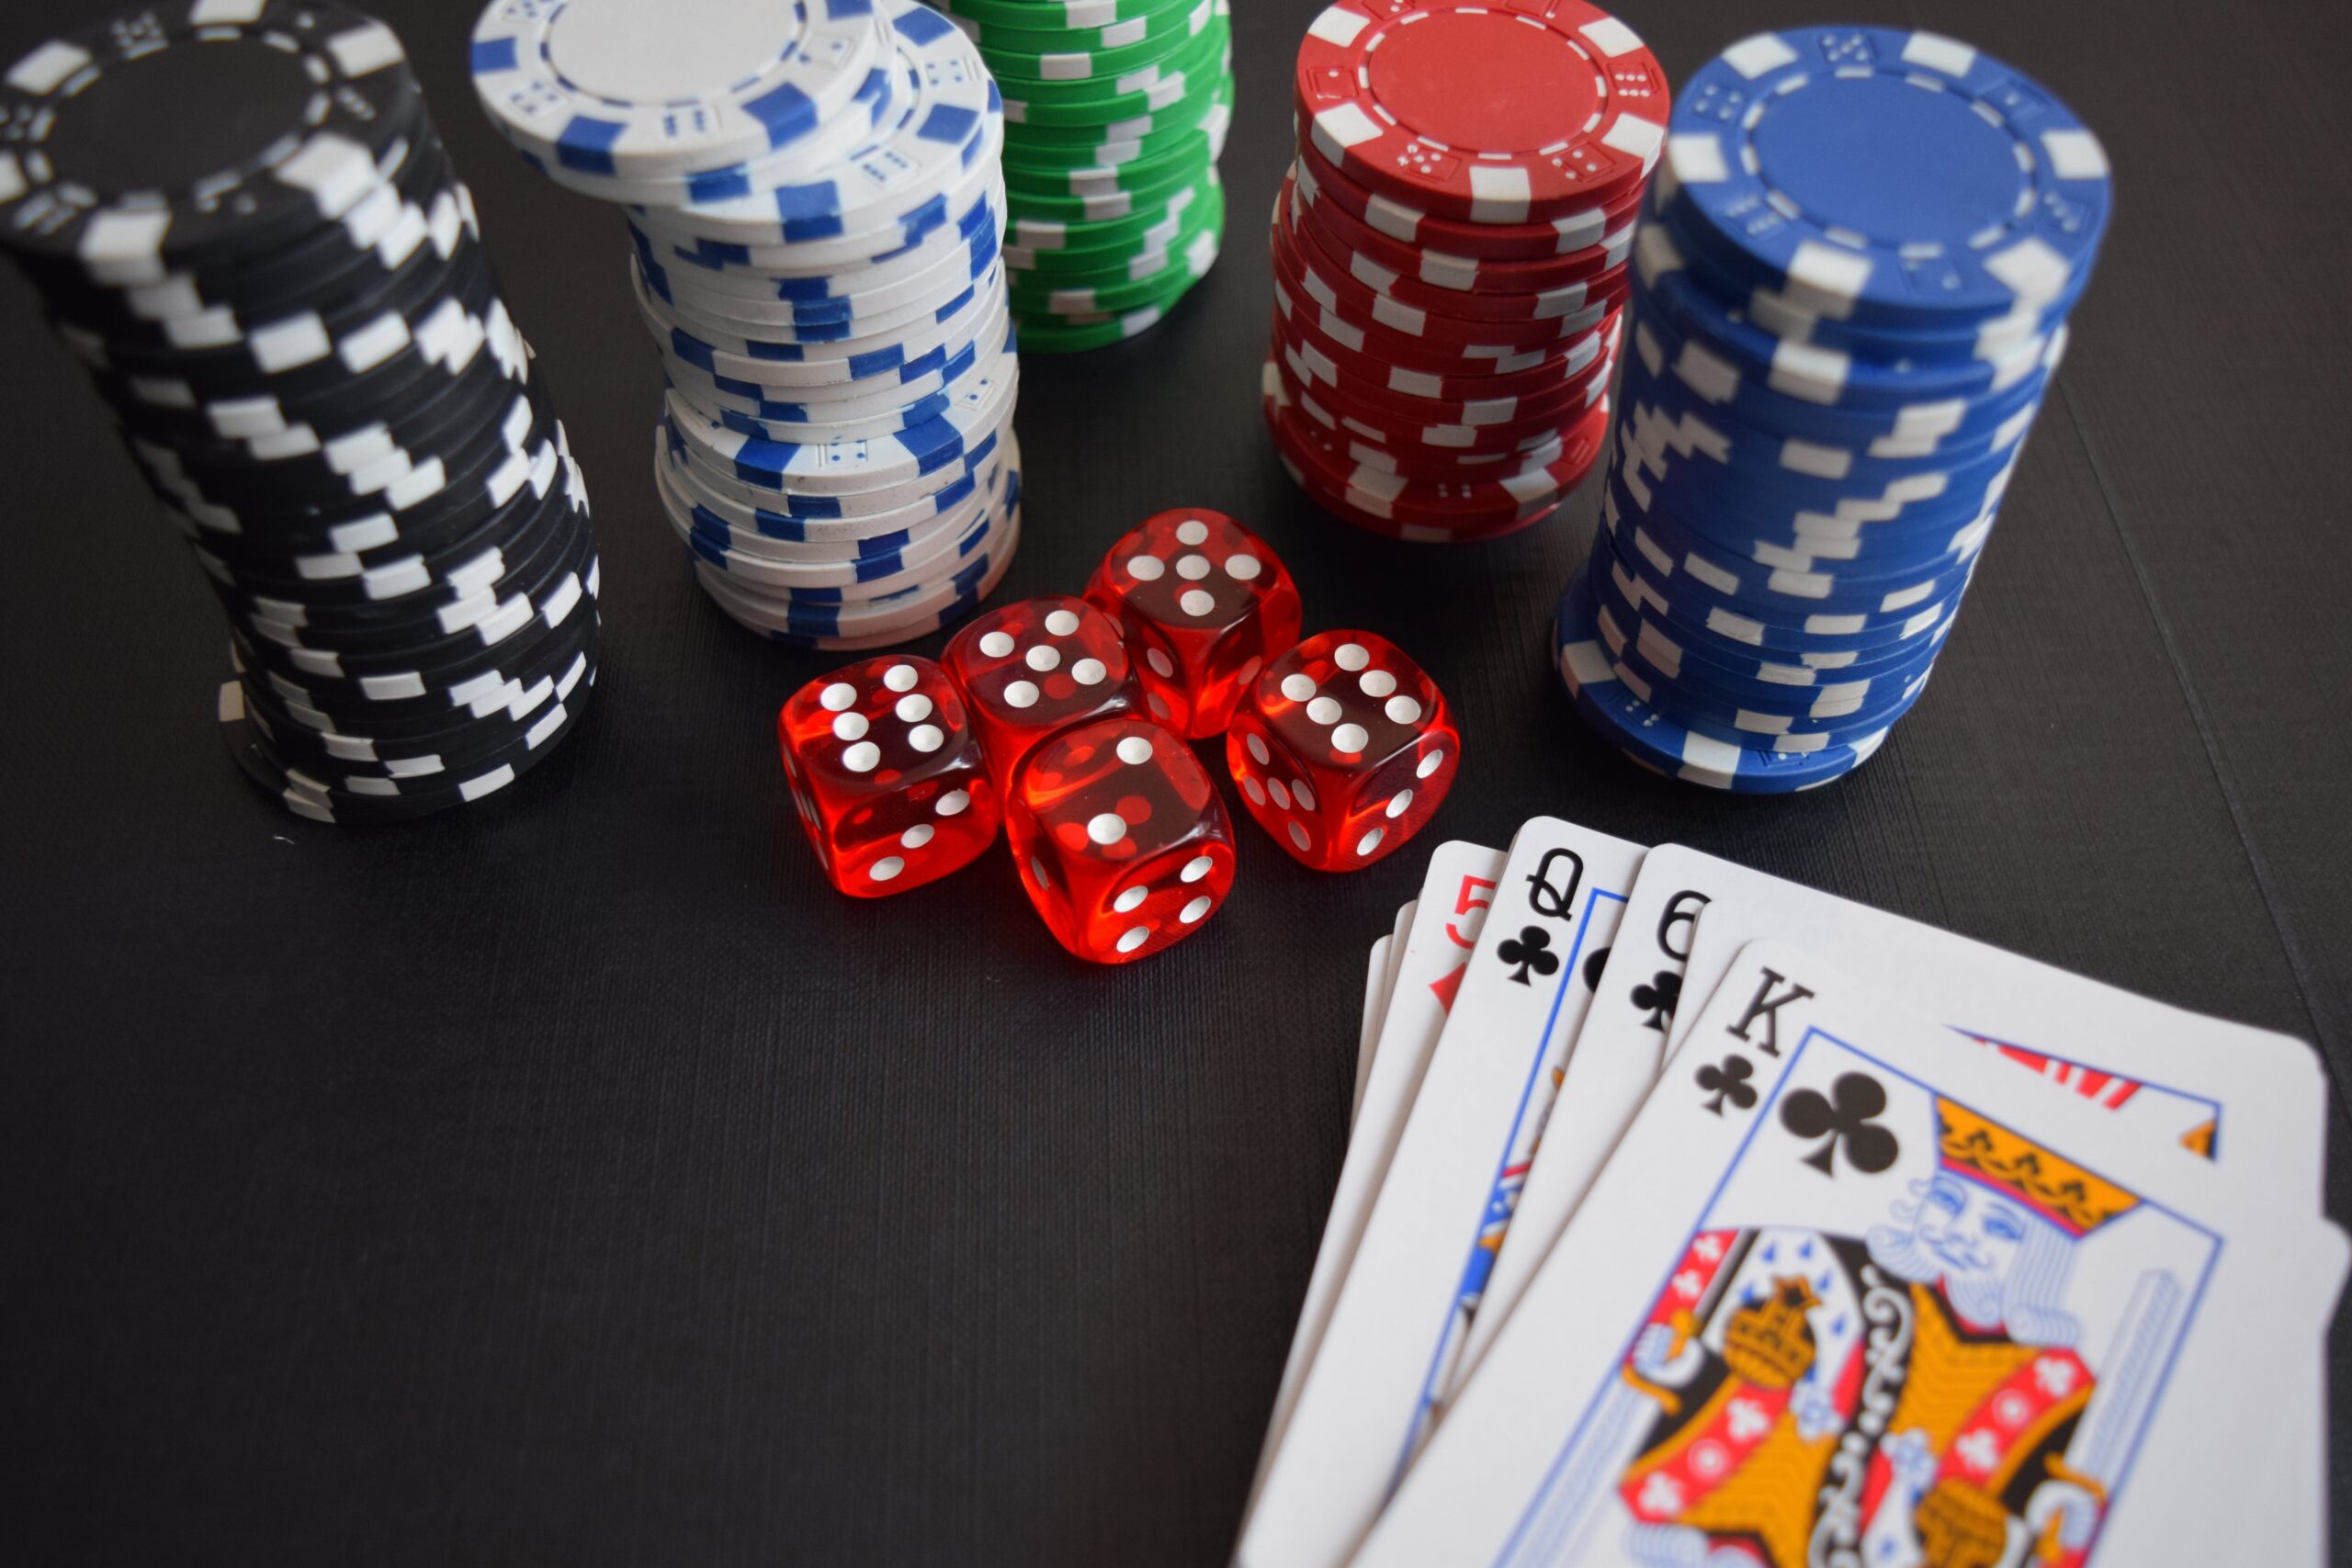 What New Bonuses Can You Find in Online Casinos in 2020